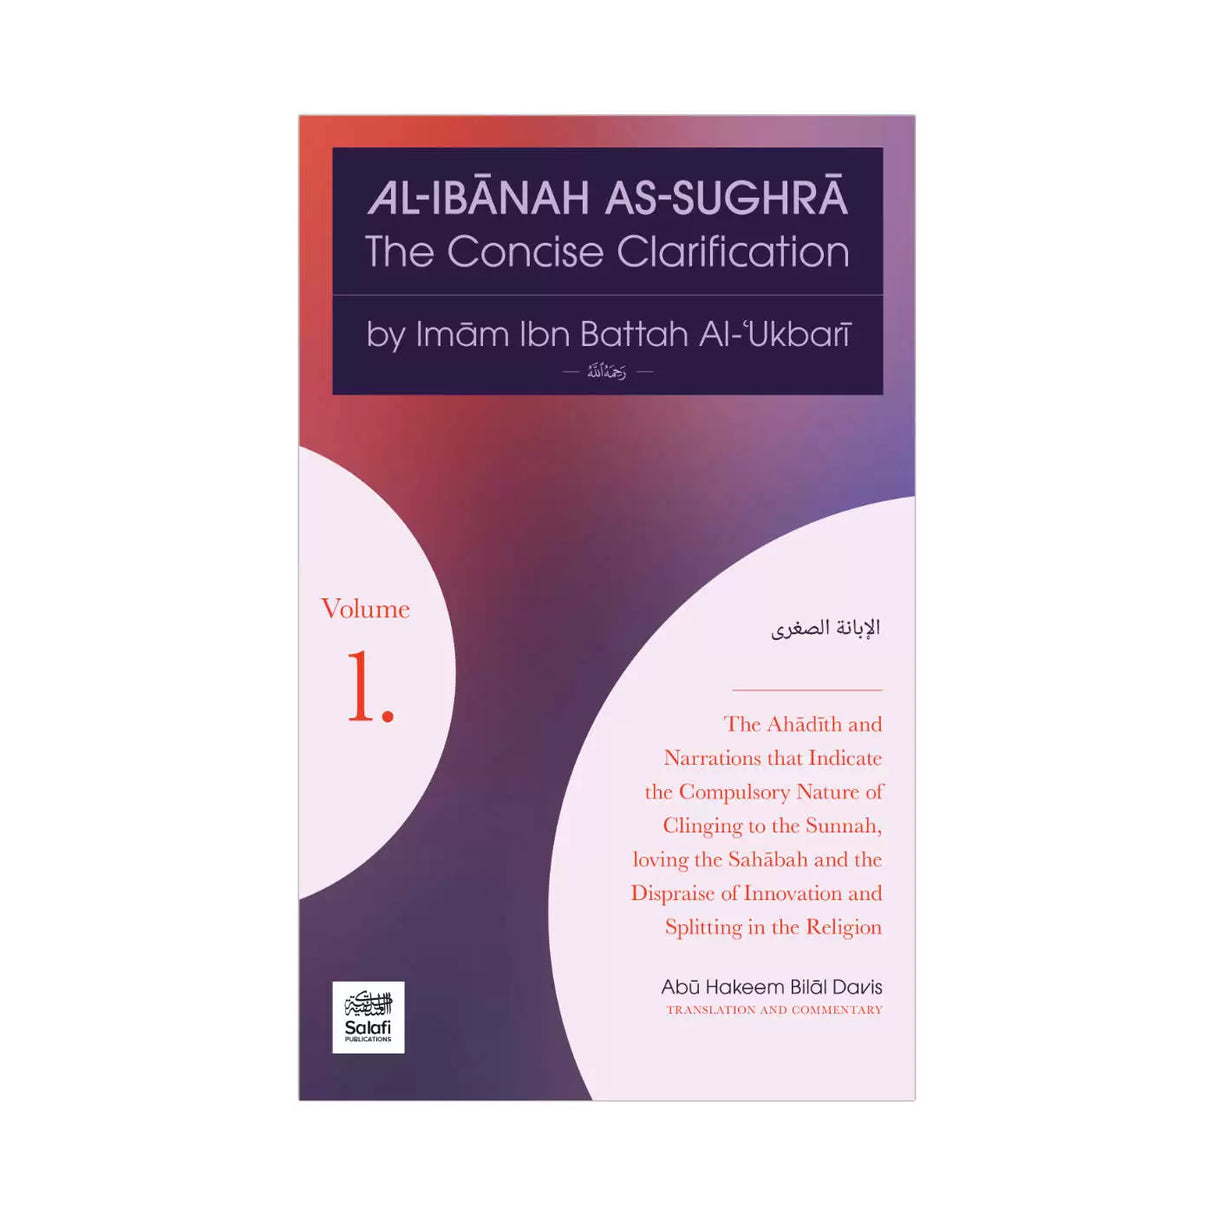 Al-Ibanah As-Sughra – The Concise Clarifications